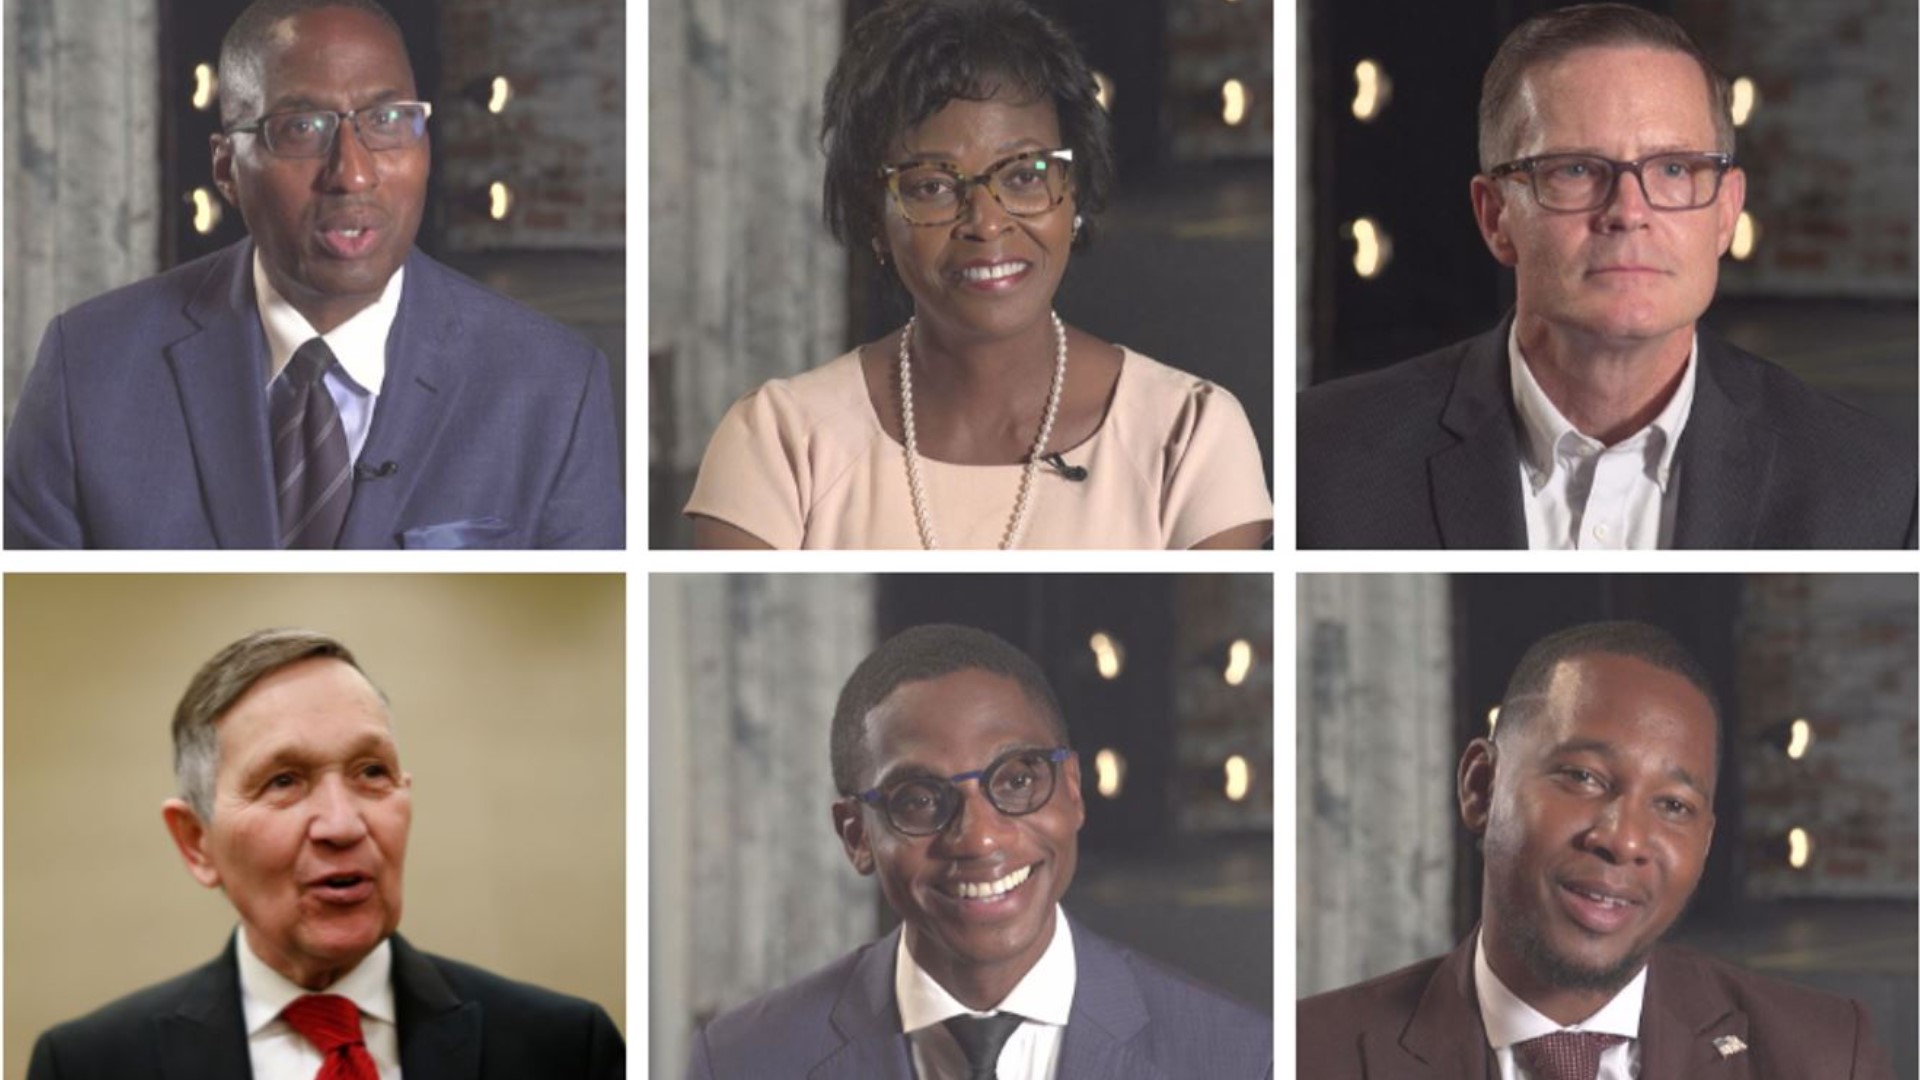 This is a sneak peek at our batch of special in-depth interviews we conducted with the Cleveland mayoral candidates.